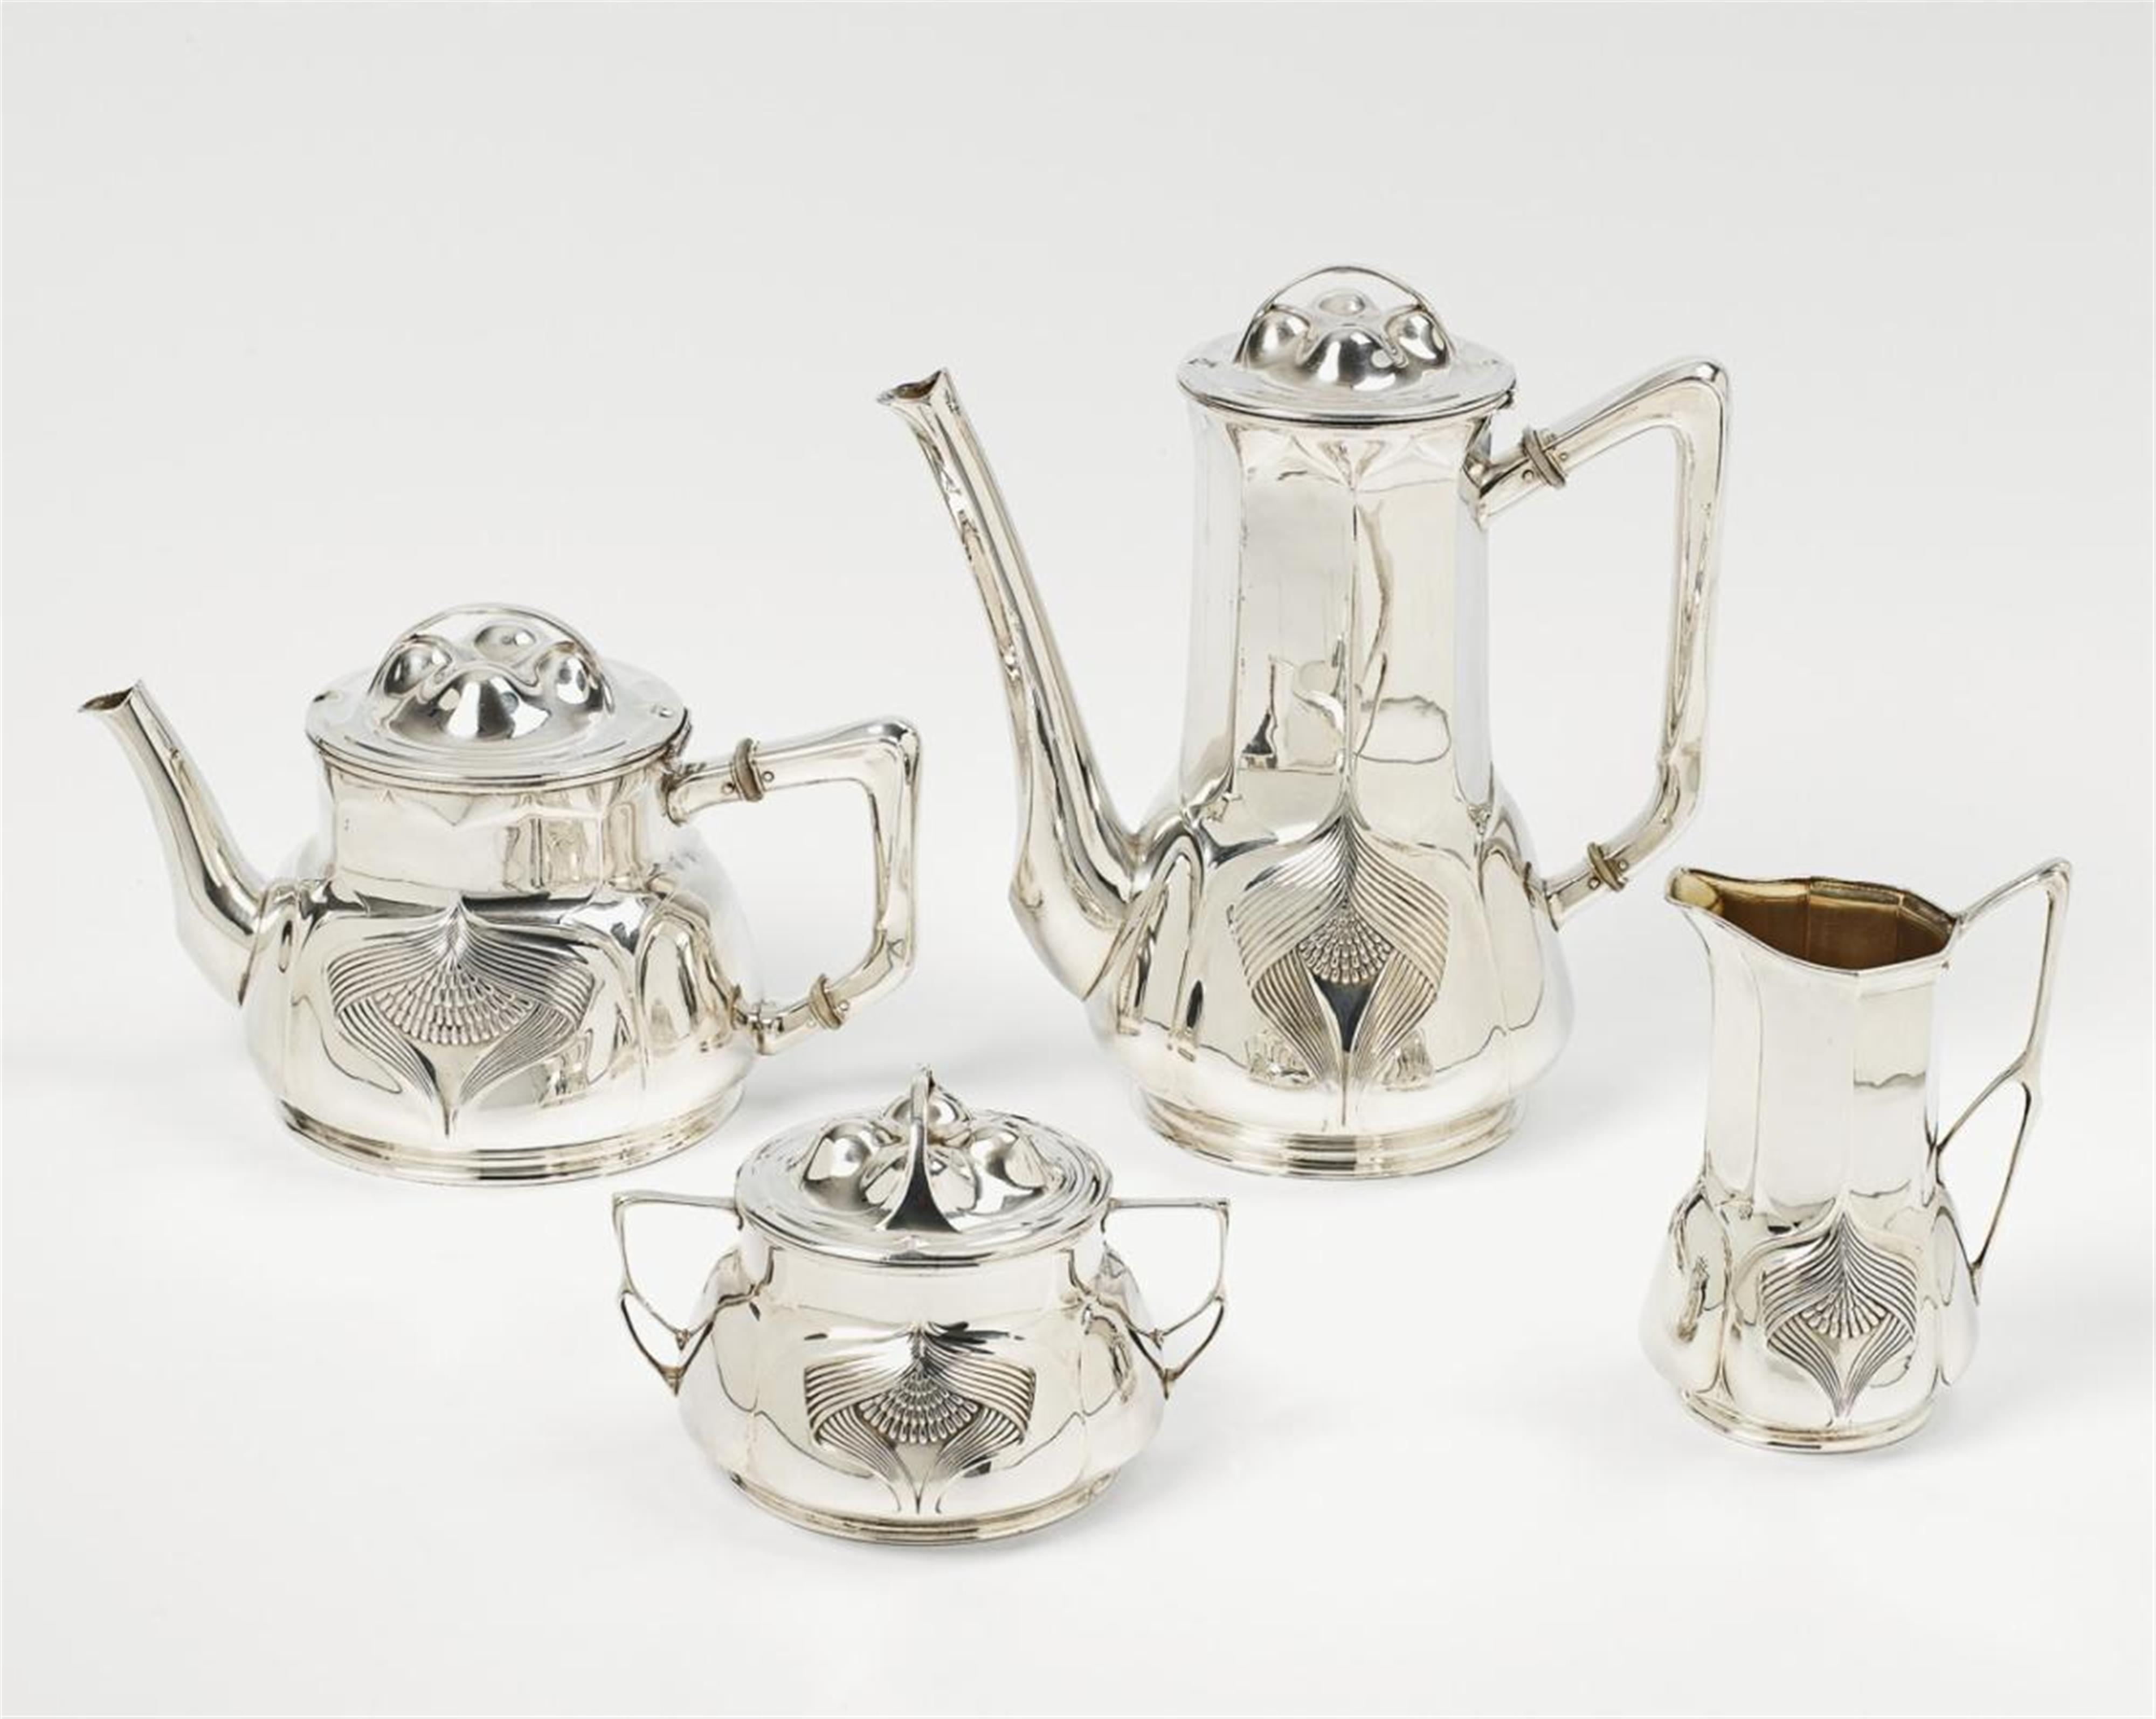 A Cologne silver partially gilt service. Comprising coffee and teapots, milk jug and sugar box. Marks of Orivit, 1903/04. - image-1